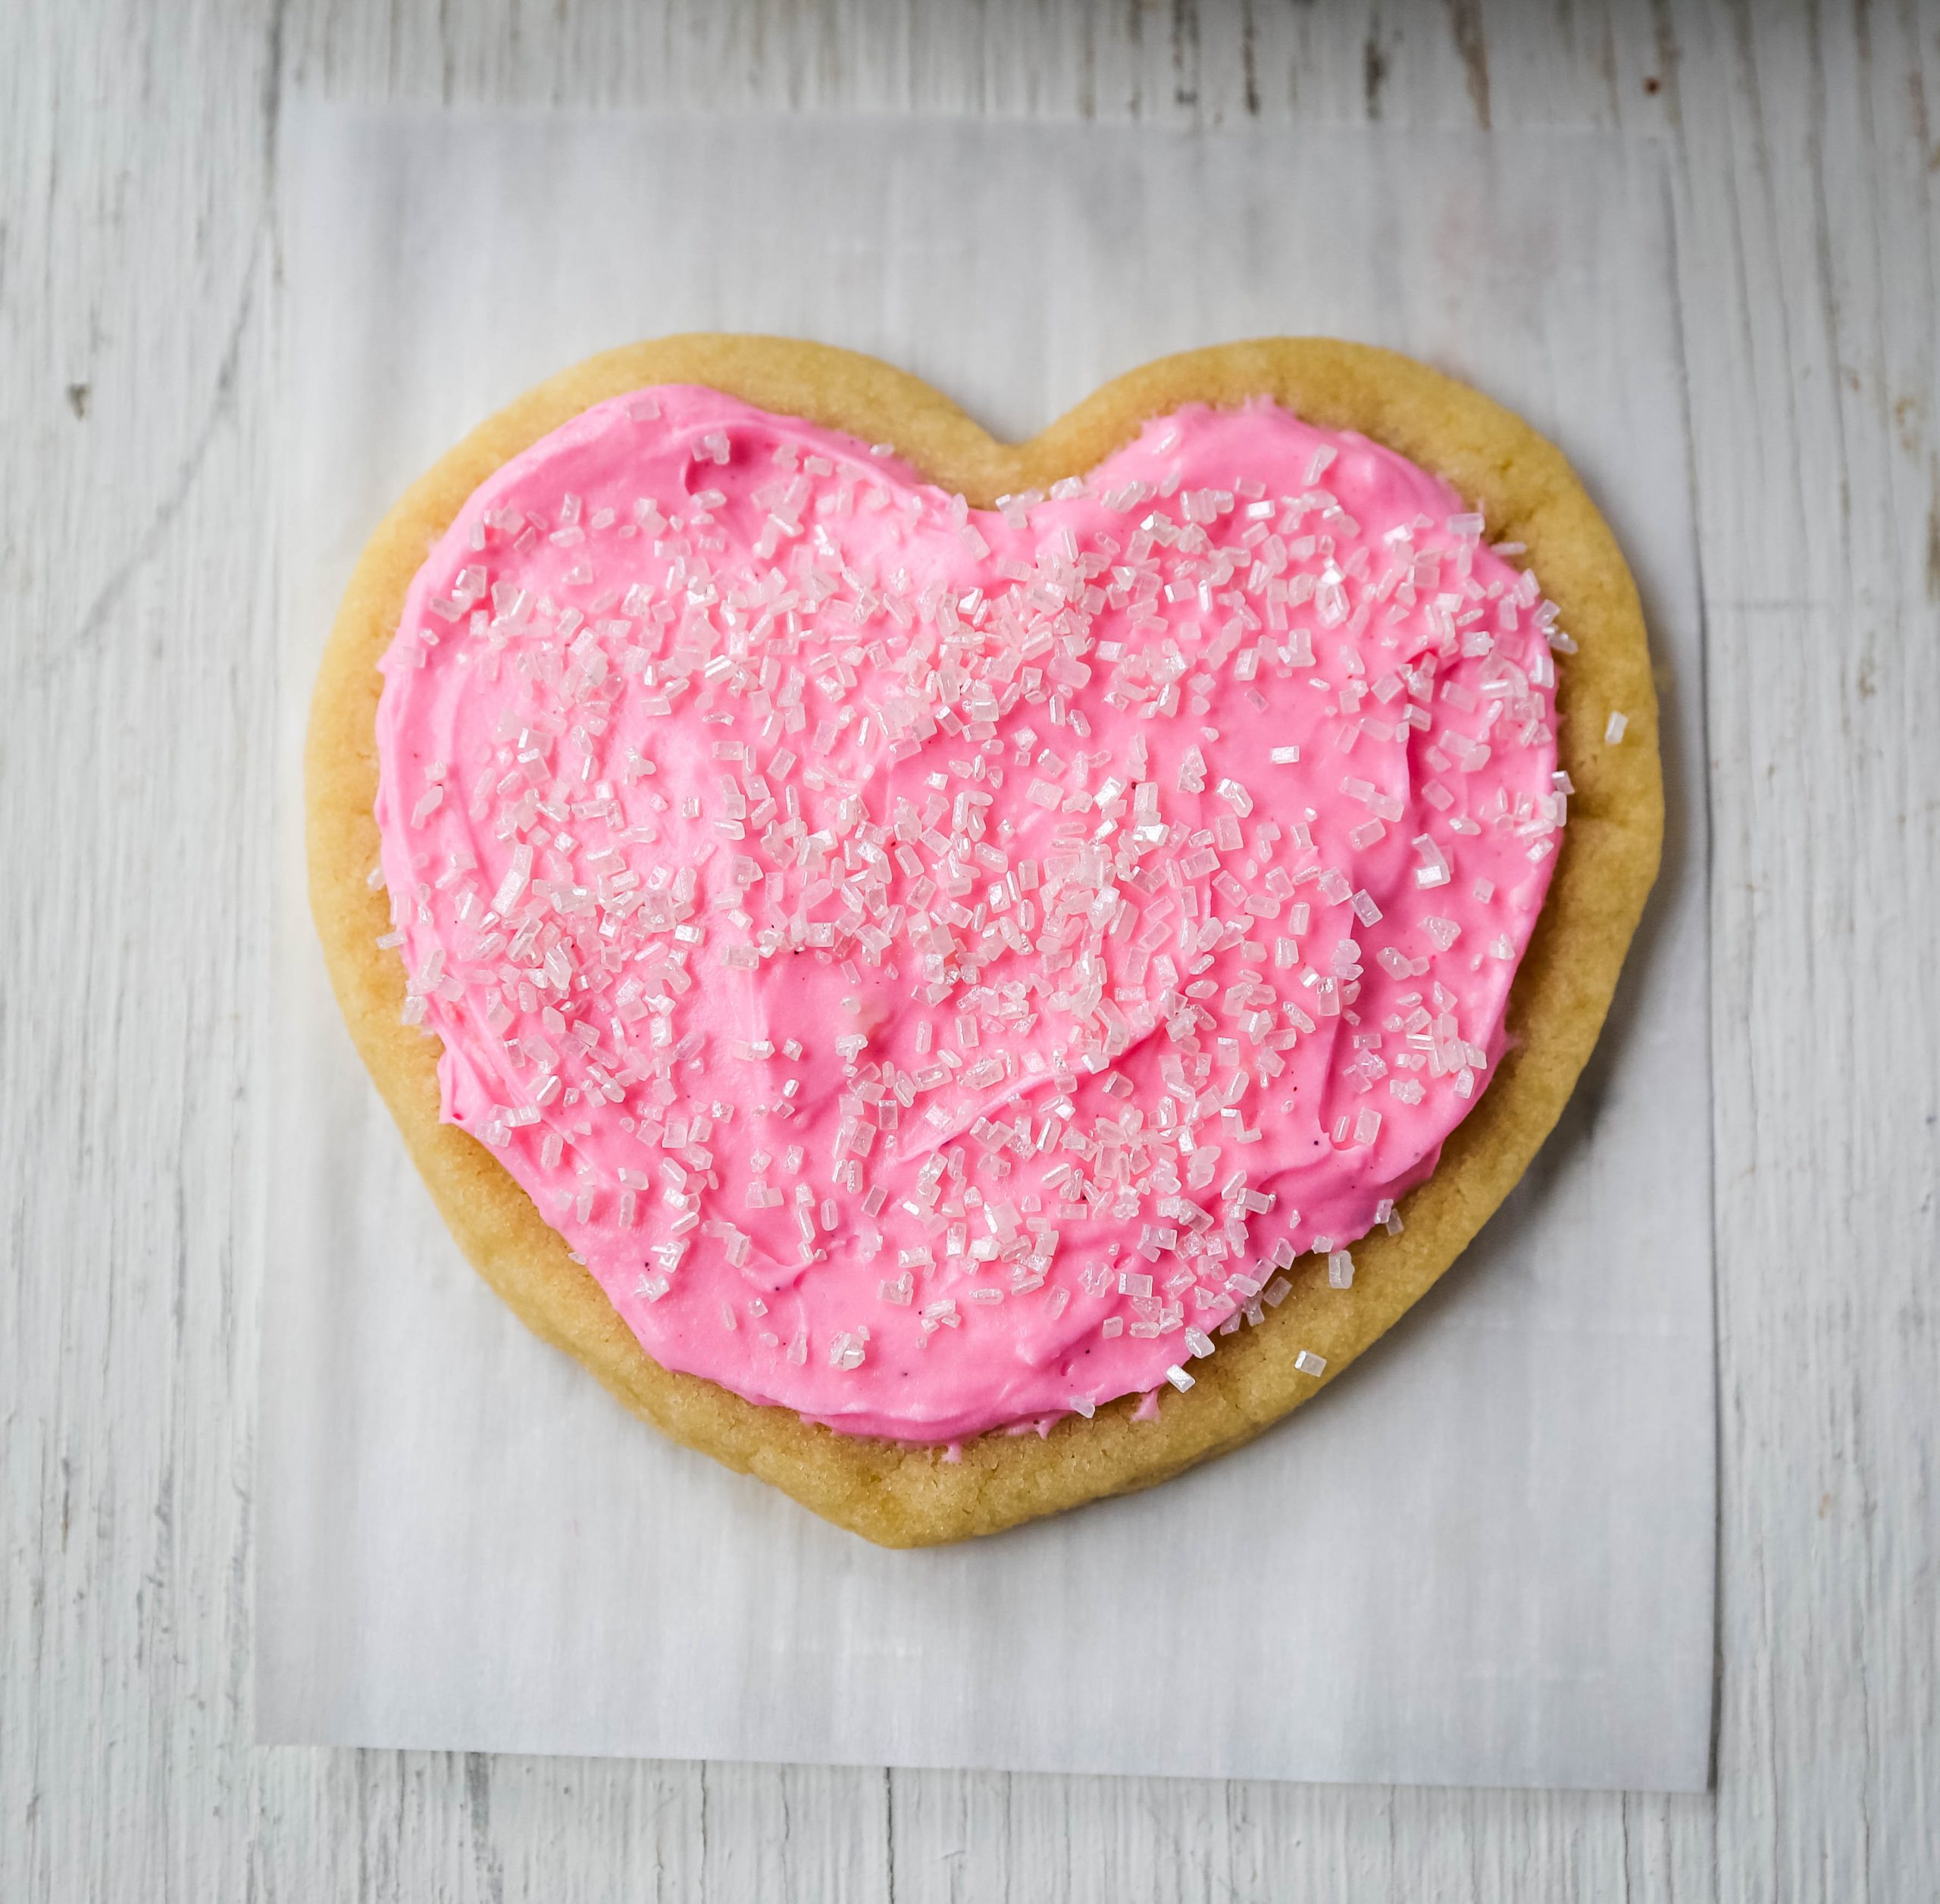 Jacque's Buttery Sugar Cookies. Homemade buttery sugar cookies with sweet buttercream frosting. The perfect frosted sugar cookie recipe! www.modernhoney.com #sugarcookies #buttercookies #buttersugarcookies #heartcookies #valentinesday #valentinesdaycookies